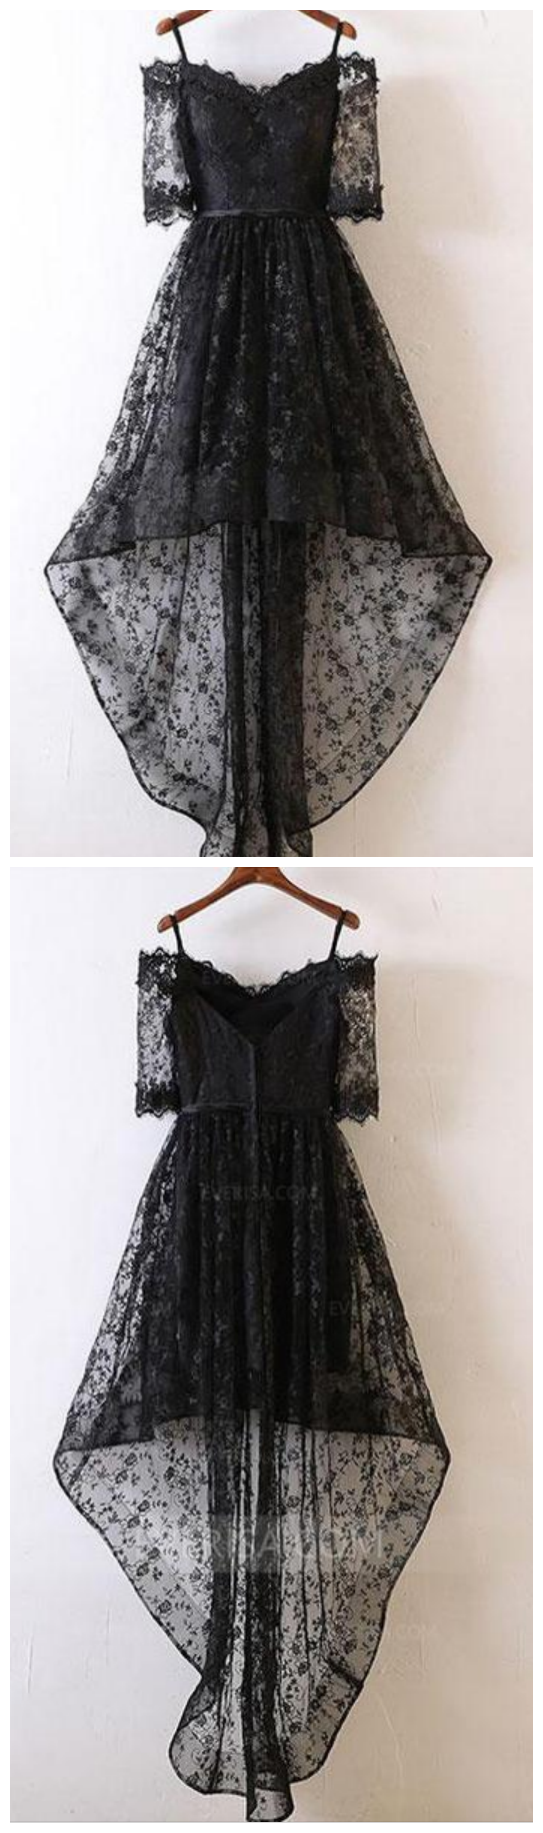 Black Half Sleeves Lace Homecoming Dresses,high Low Cocktail Dresses